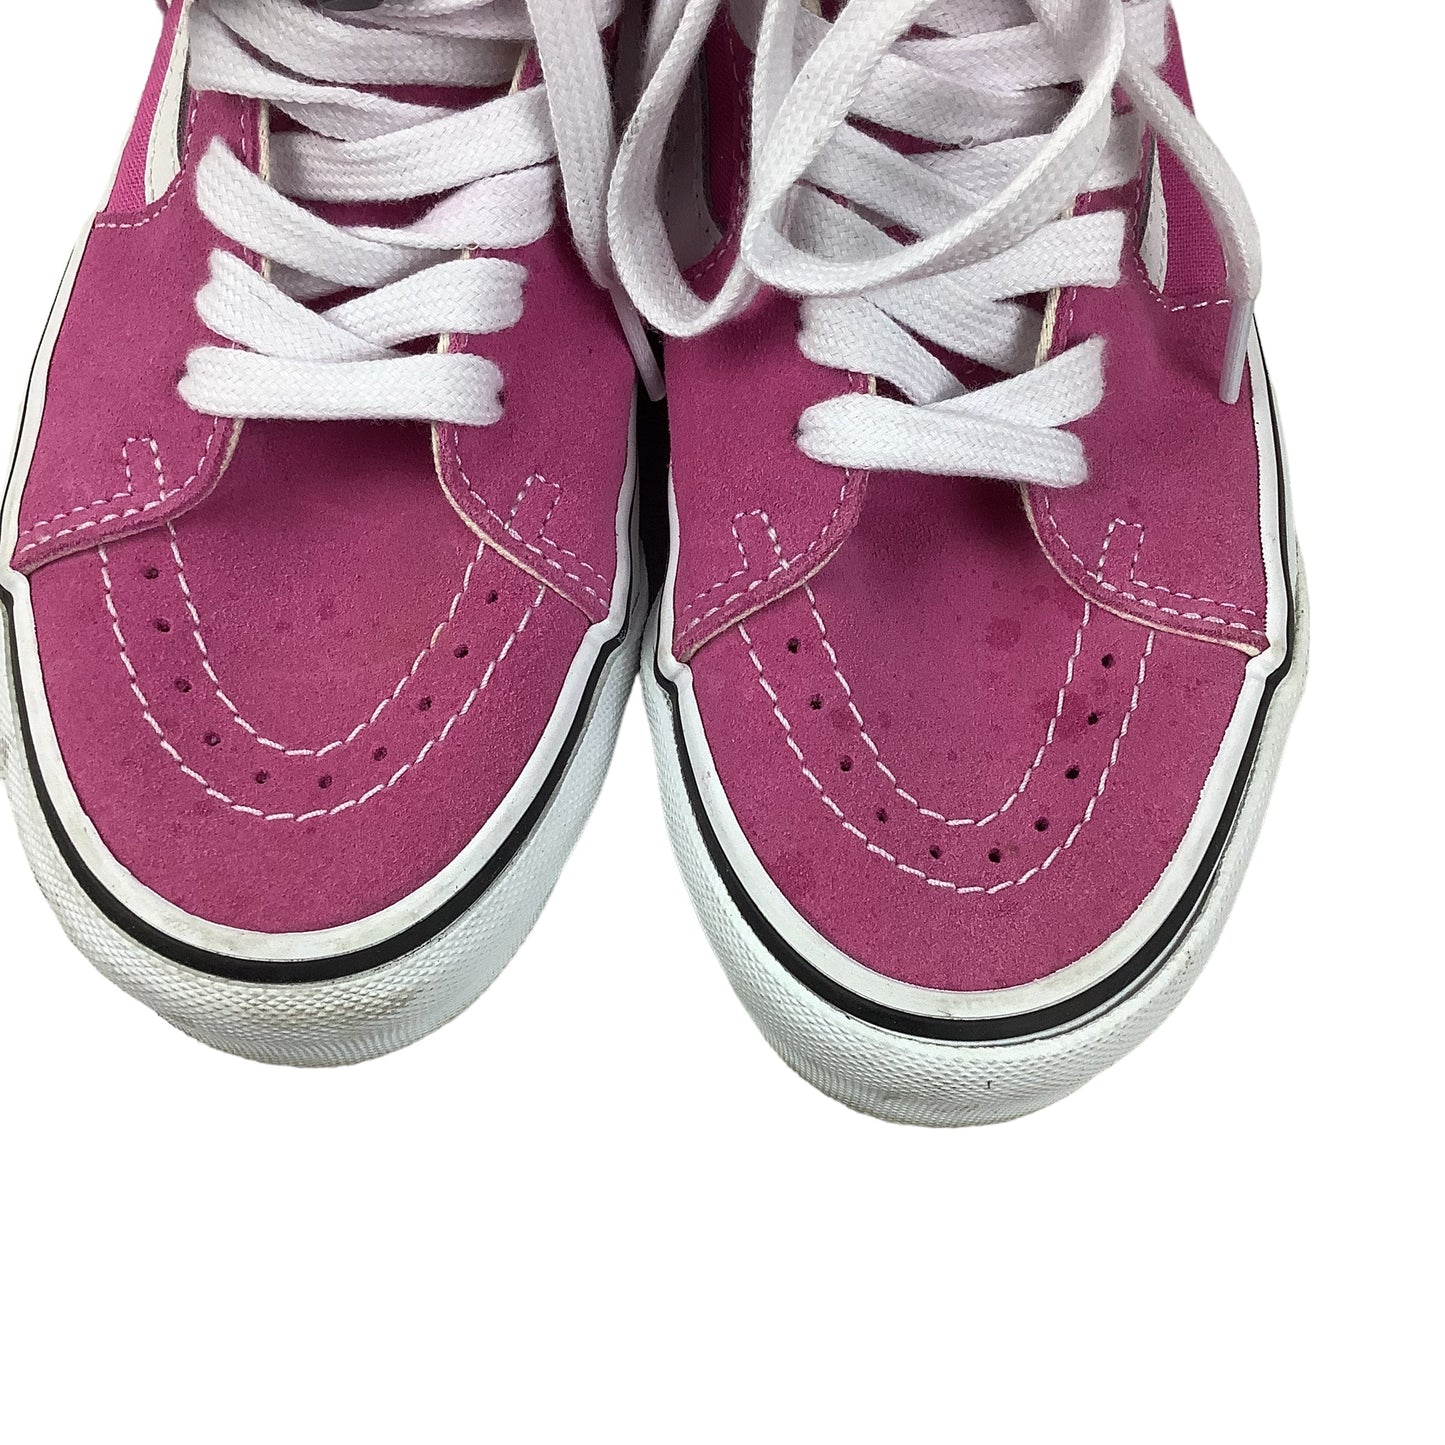 Pink Shoes Sneakers Vans, Size 6.5